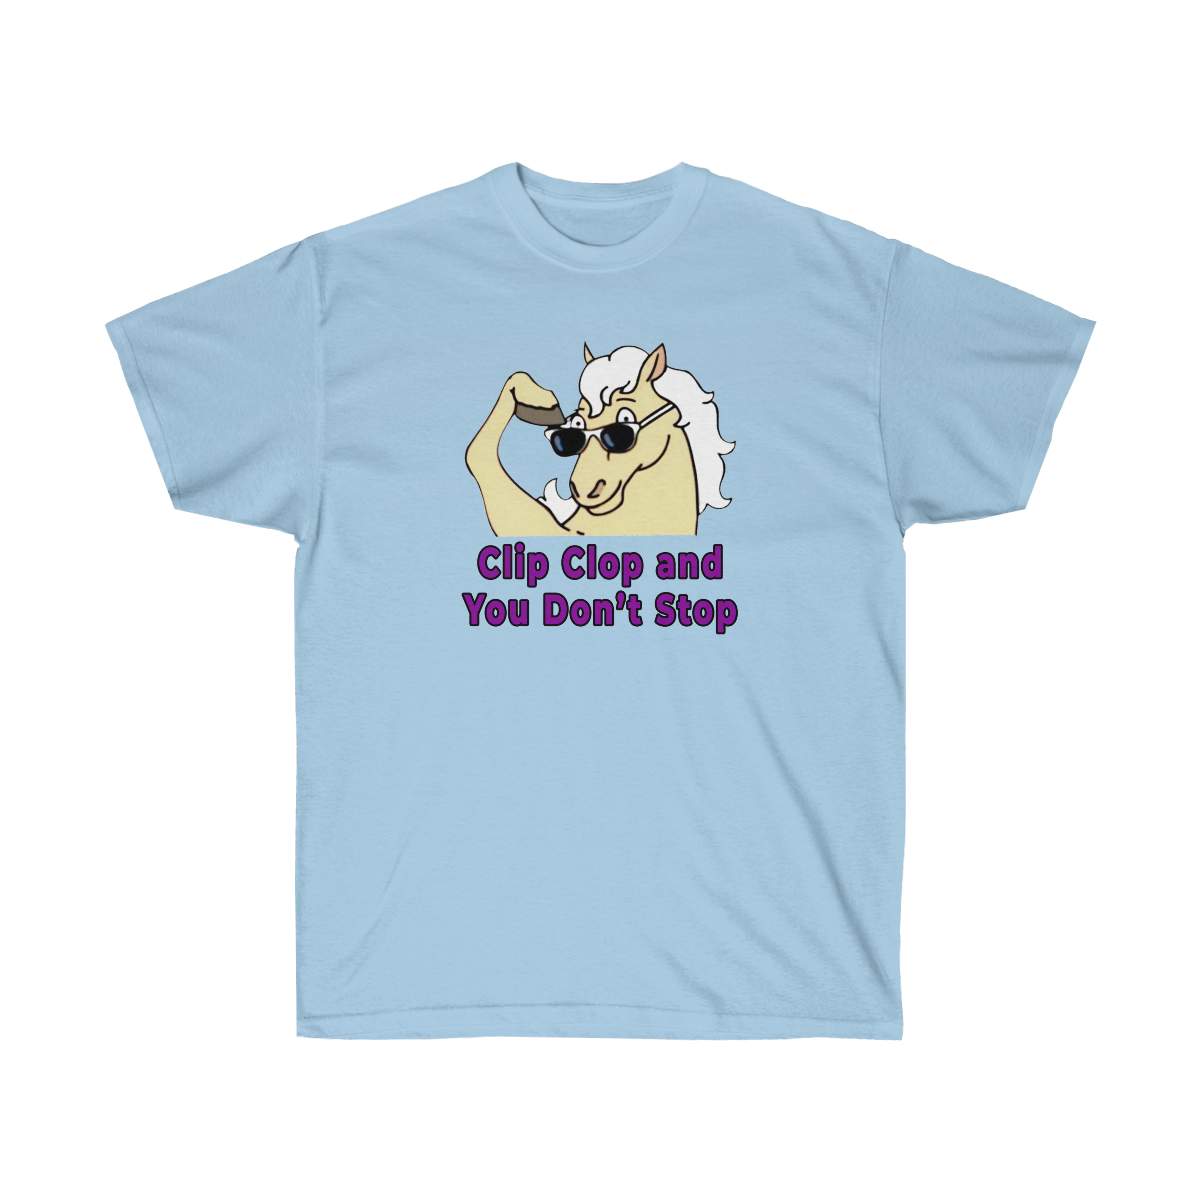 Clip Clop and You Don't Stop Unisex Cotton Tee - Just Like Bob Bob's Burgers